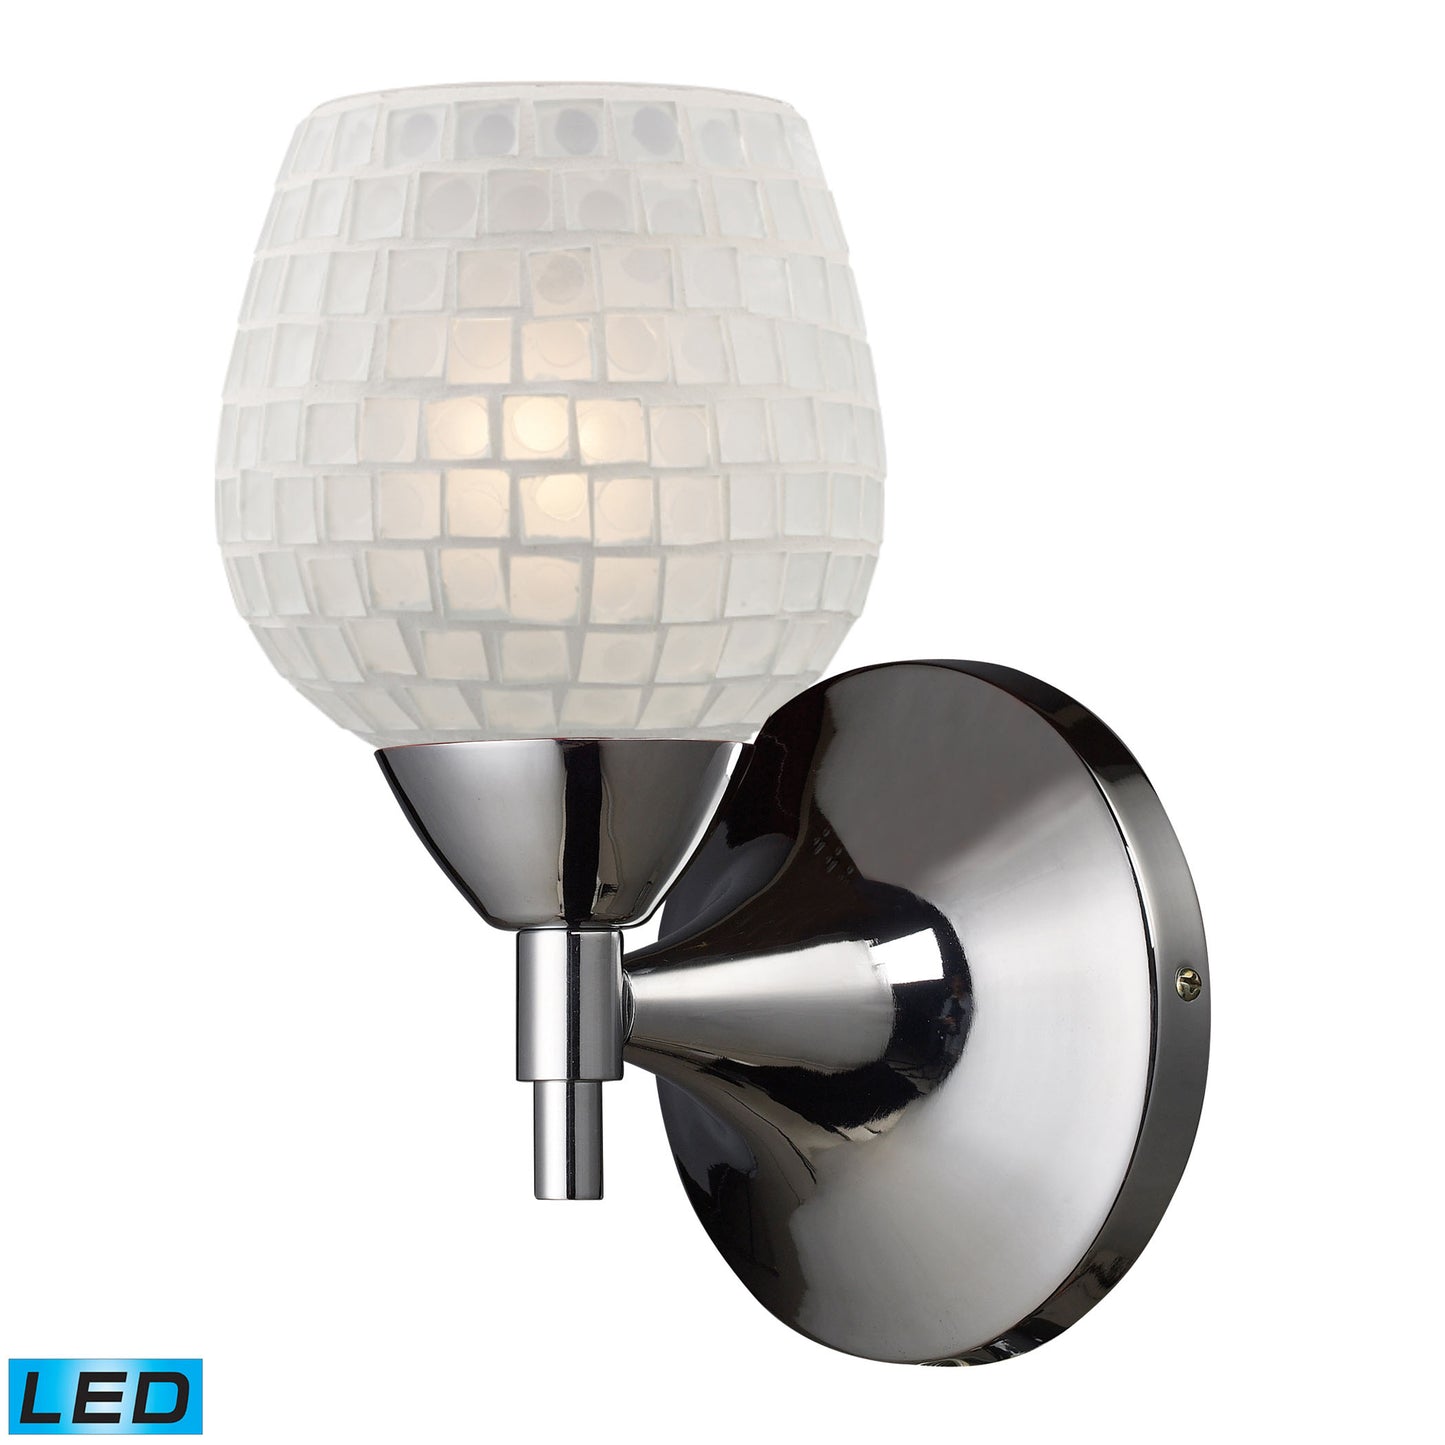 Celina 1-Light Wall Lamp in Polished Chrome with White Glass - Includes LED Bulb